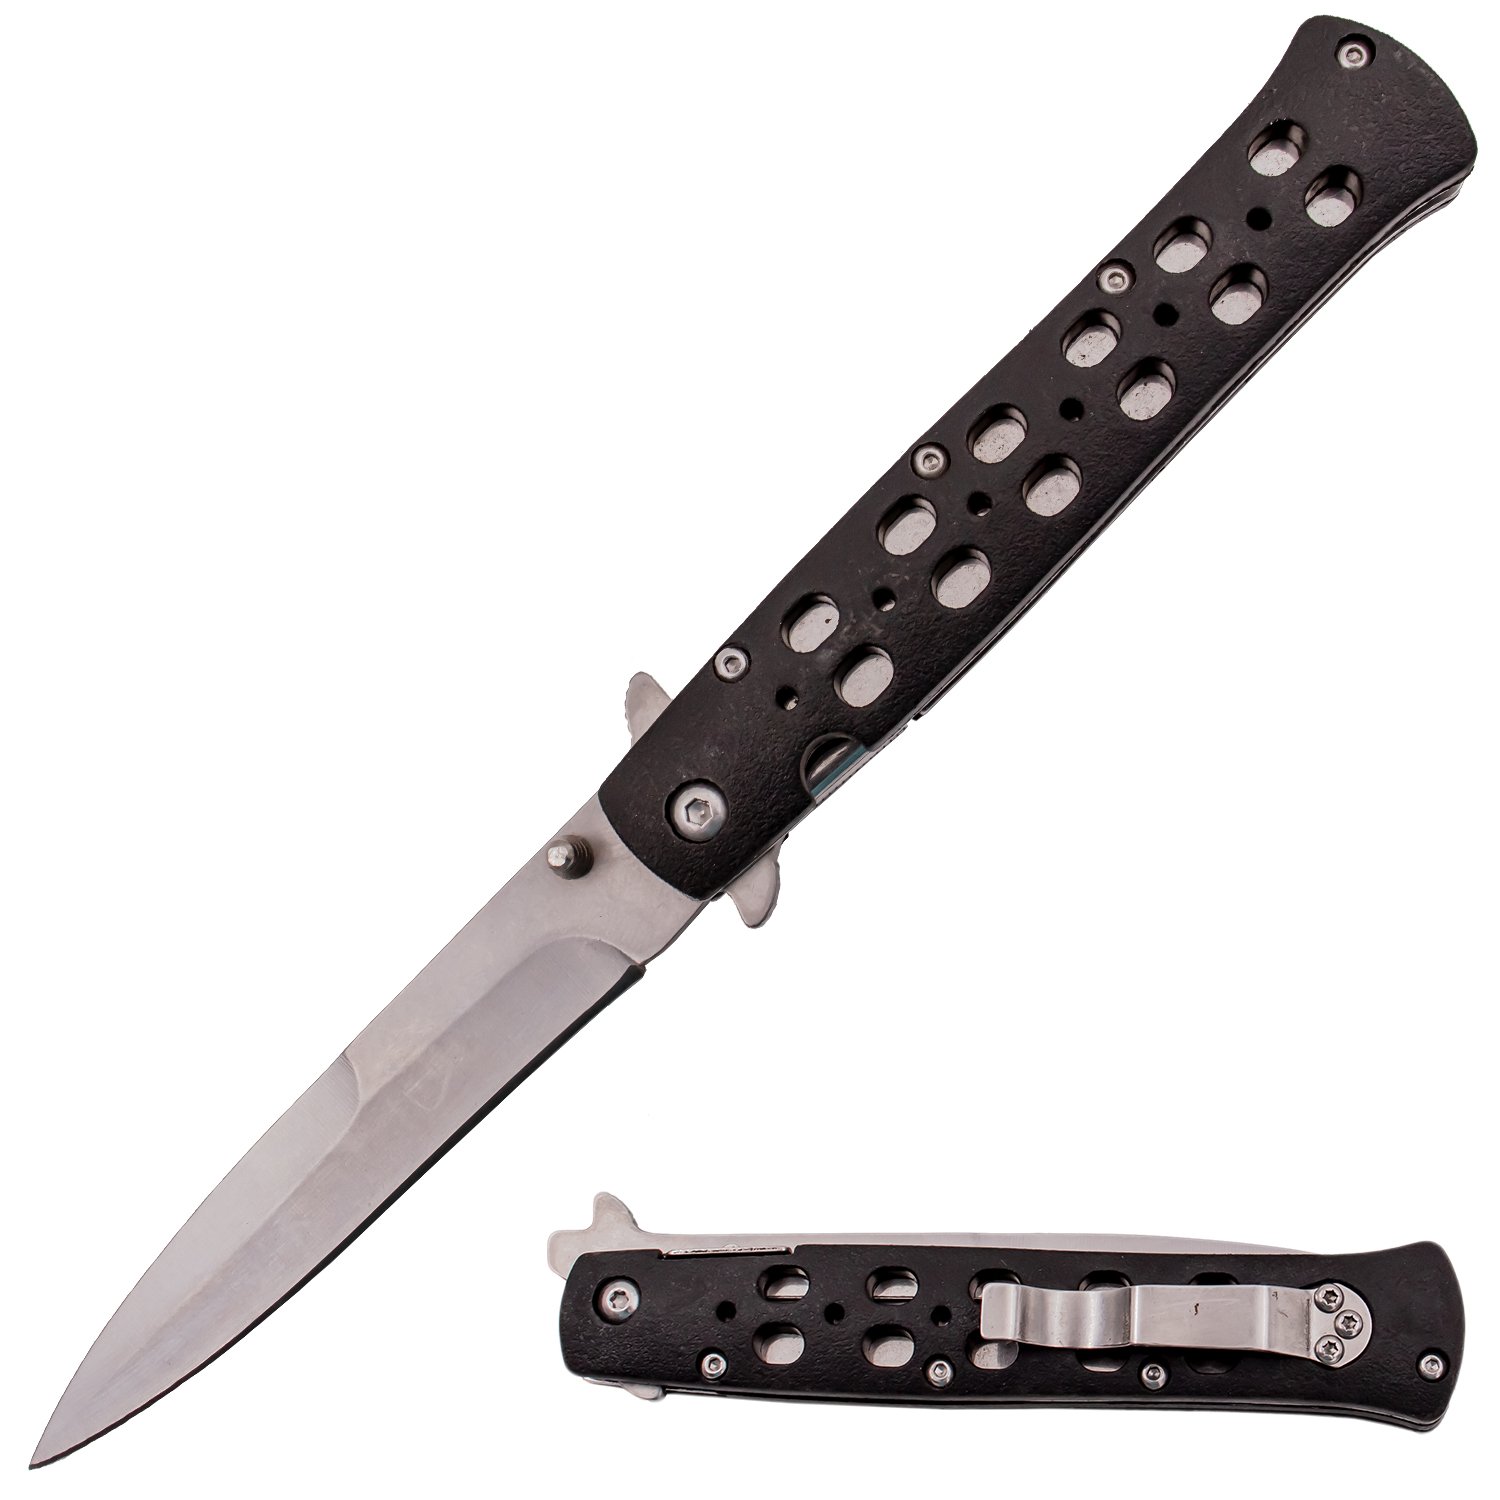 8.5 Inch MANUAL Stiletto Style Folding Knife ABS Handle